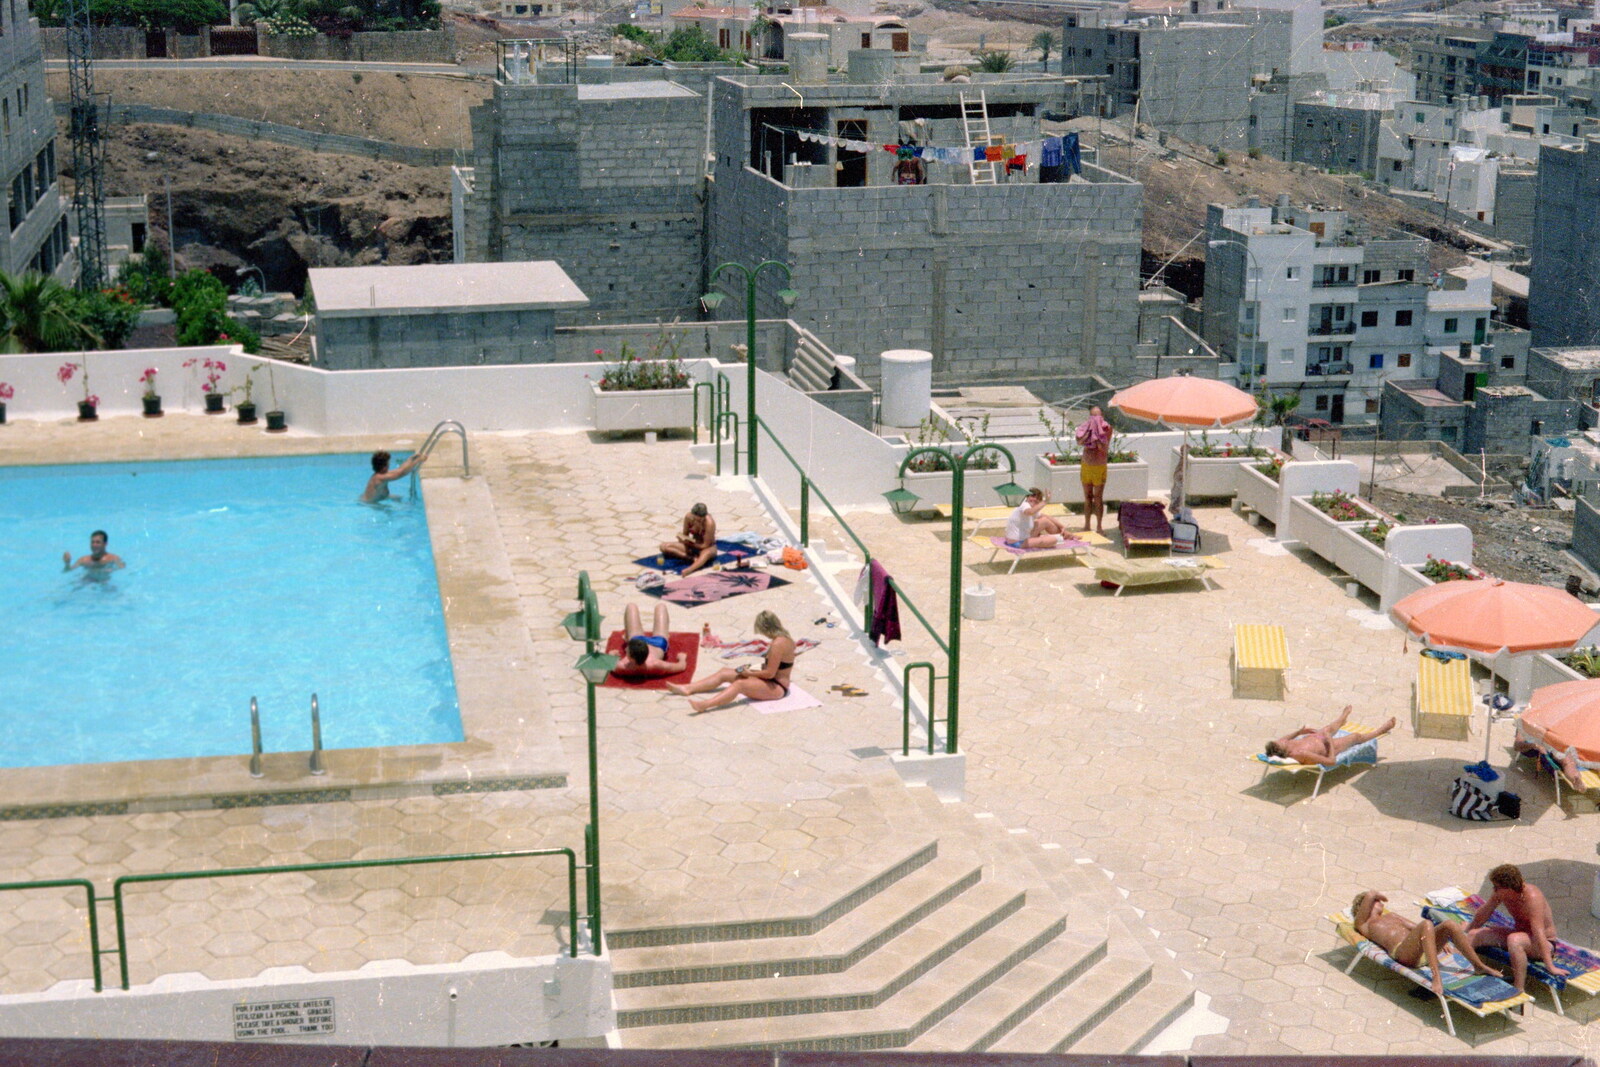 More building-site action from A Holiday in Los Christianos, Tenerife - 19th June 1985